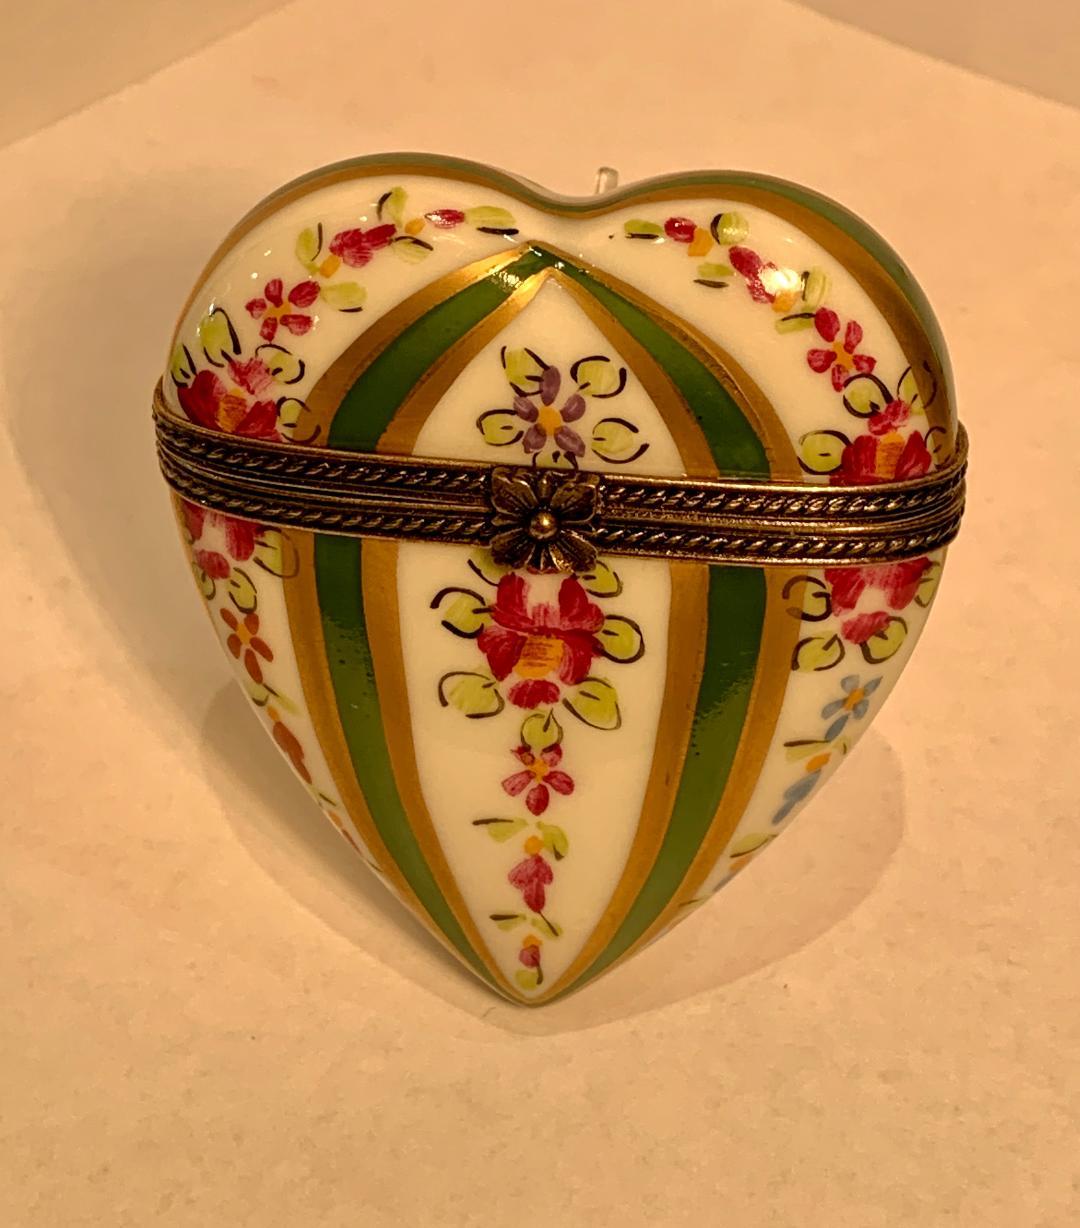 Make that special someone in your life very happy this Valentine's Day or any occasion with this collectible, handmade and hand painted, Limoges porcelain small heart shaped trinket box featuring a beautifully decorated colorful cascading floral